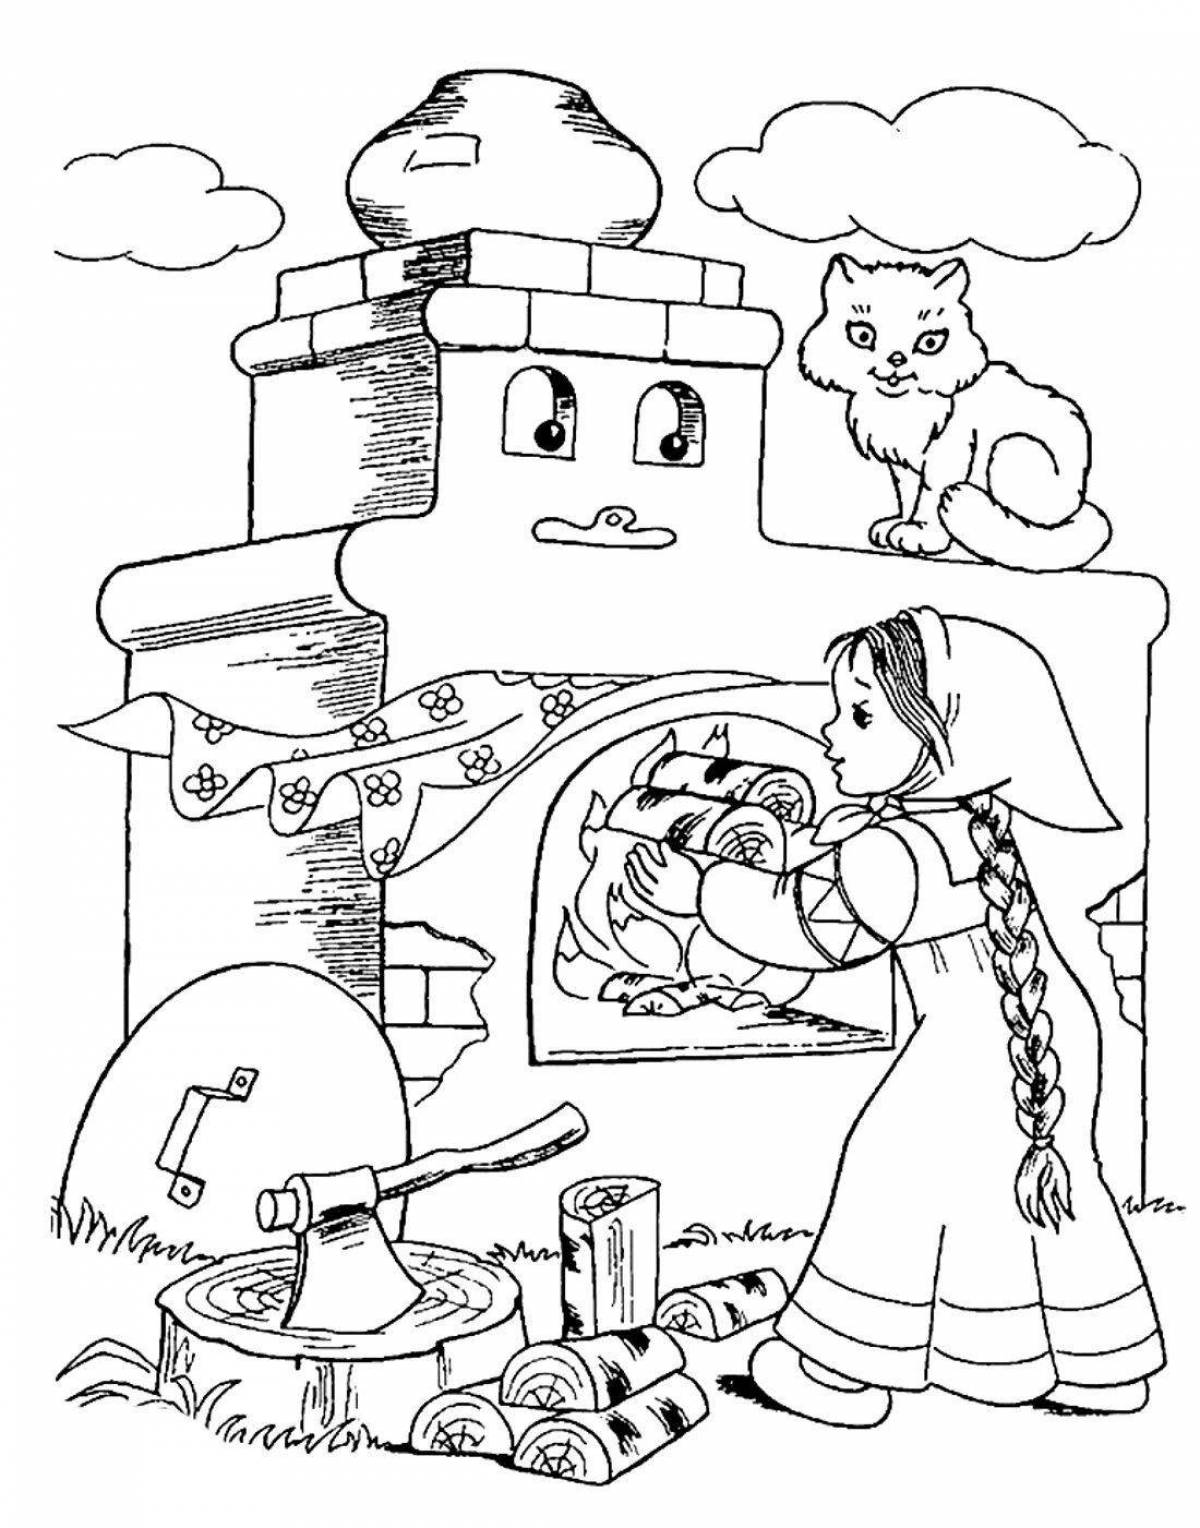 Colorful russian stove coloring book for kids